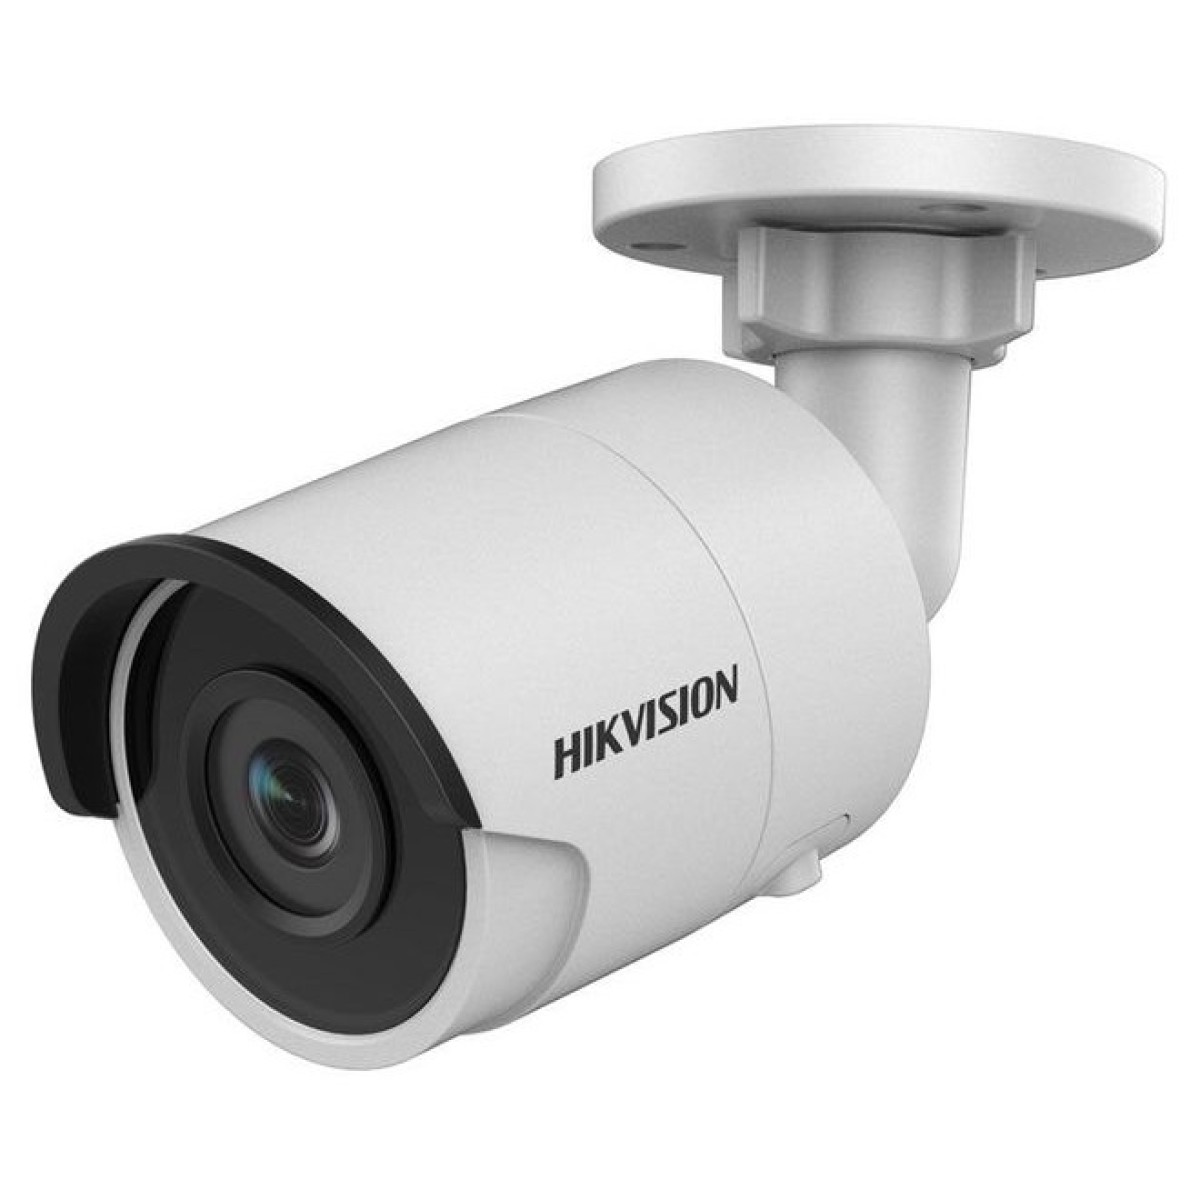 IP-камера Hikvision DS-2CD2055FWD-I (4.0) 98_98.jpg